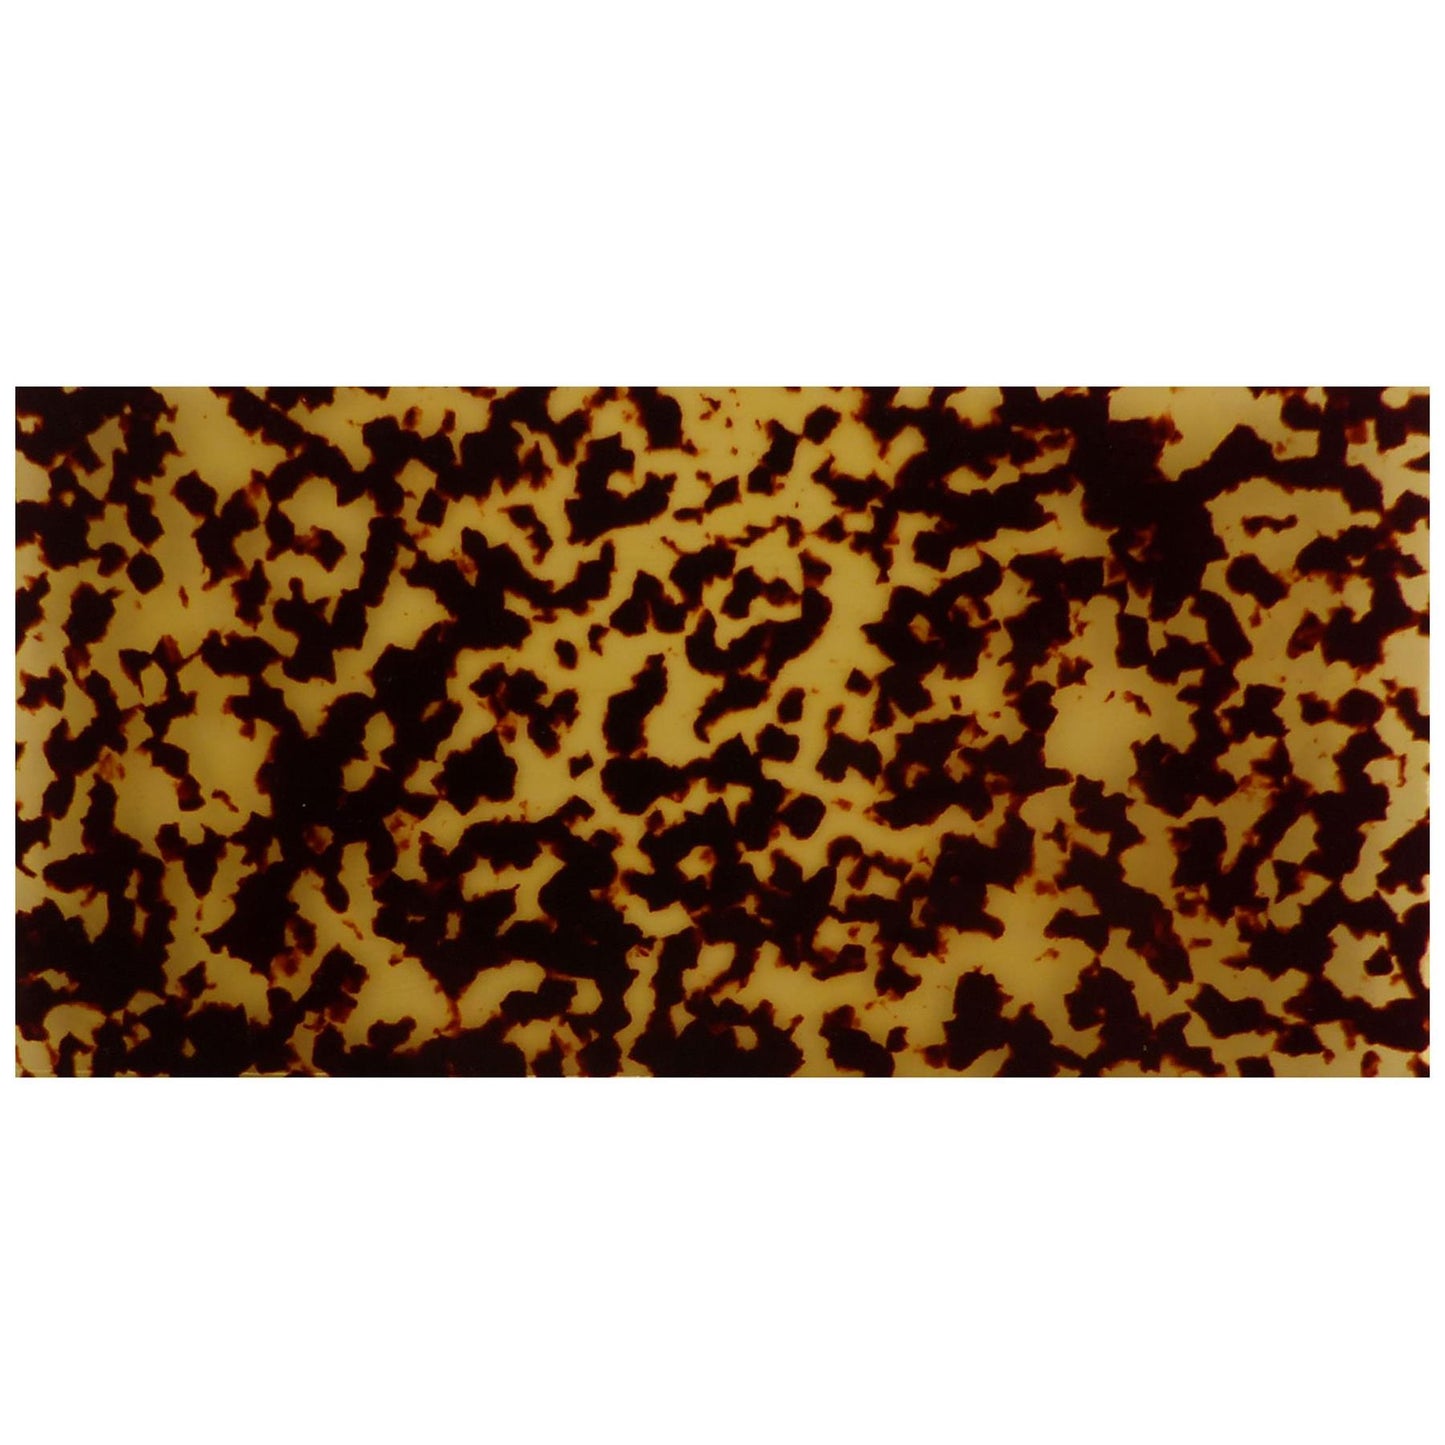 Incudo Vintage Spotted Tortoiseshell Celluloid Sheet - 200x100x0.8mm (7.9x3.94x0.03")